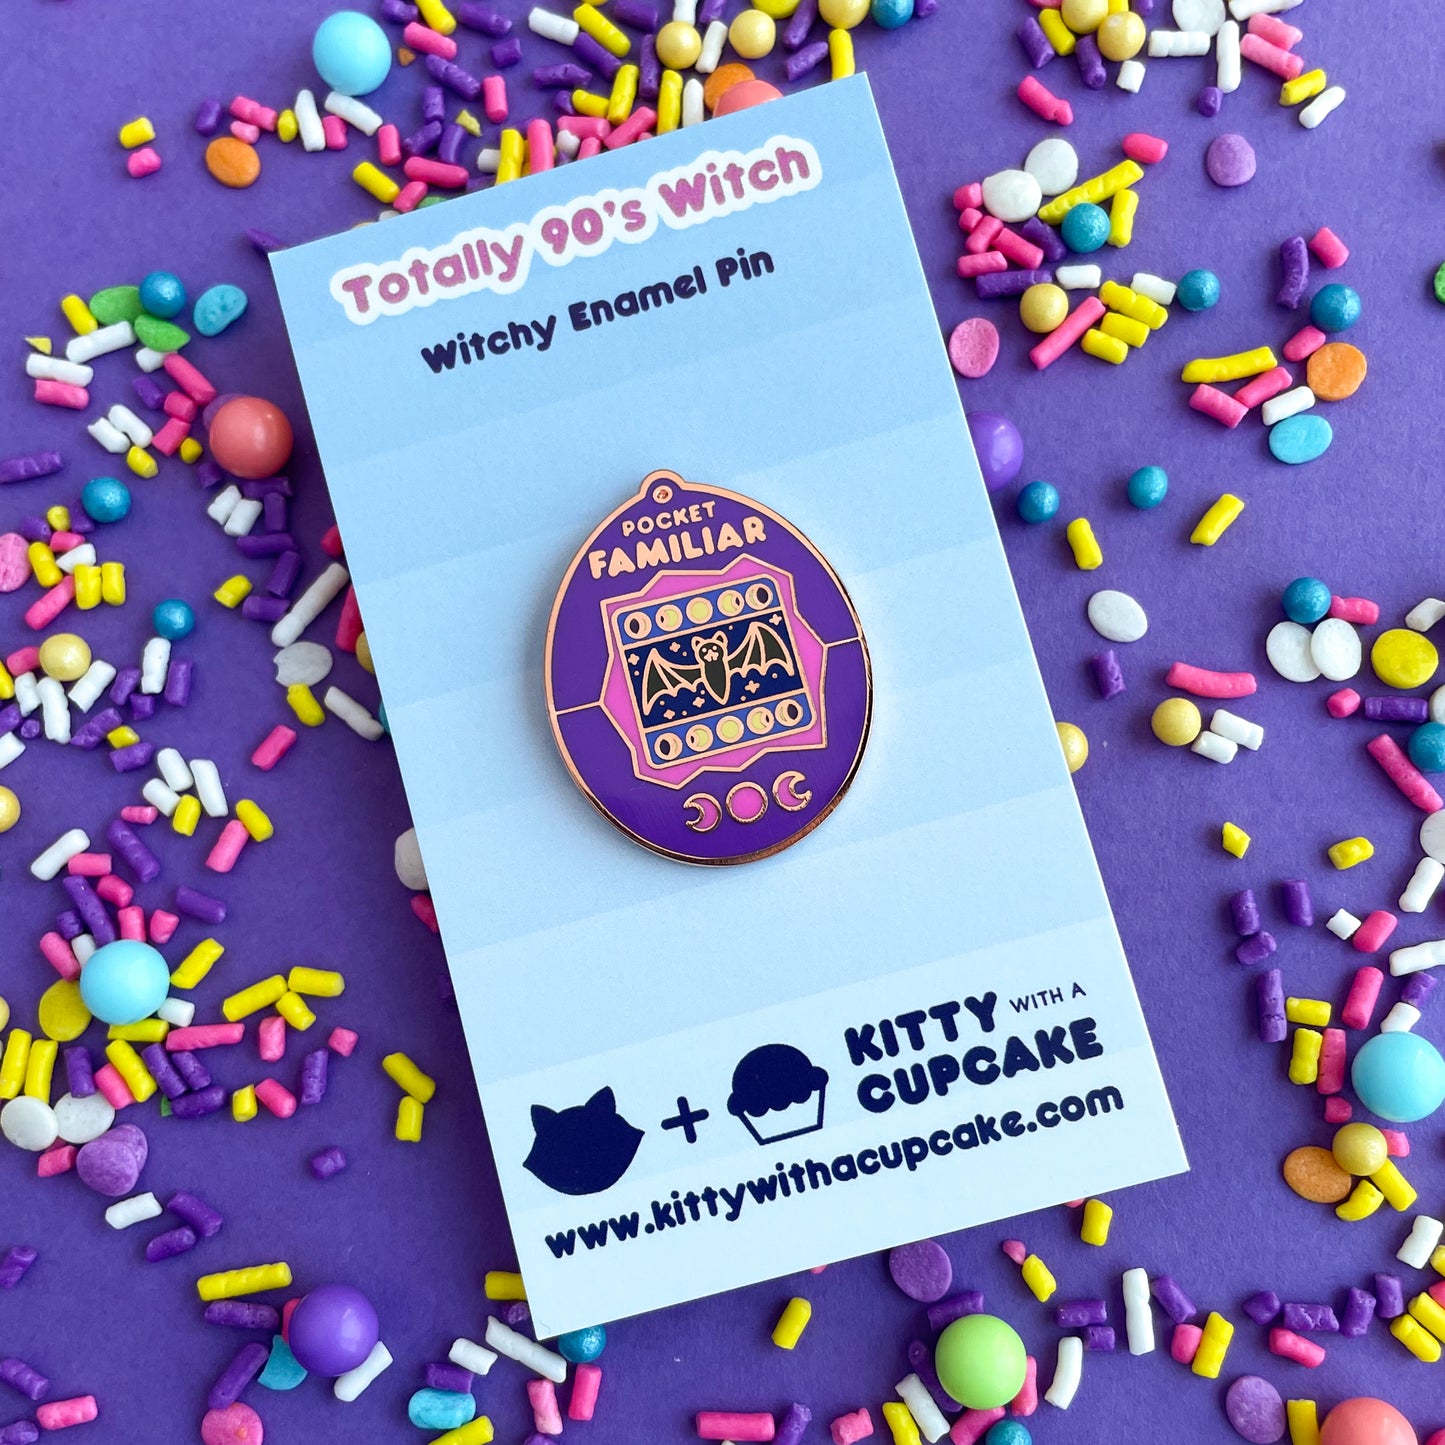 An enamel pin shaped like a Tamagotchi that reads "Pocket Familiar" at the top. It has a pink and purple shell. The screen has moon phases and a bat with night stars by it. The buttons of the tamagotchi are moon phases. The pin is on a blue backing card that reads "Totally 90's Witch" it is on a purple background covered in pastel sprinkles.